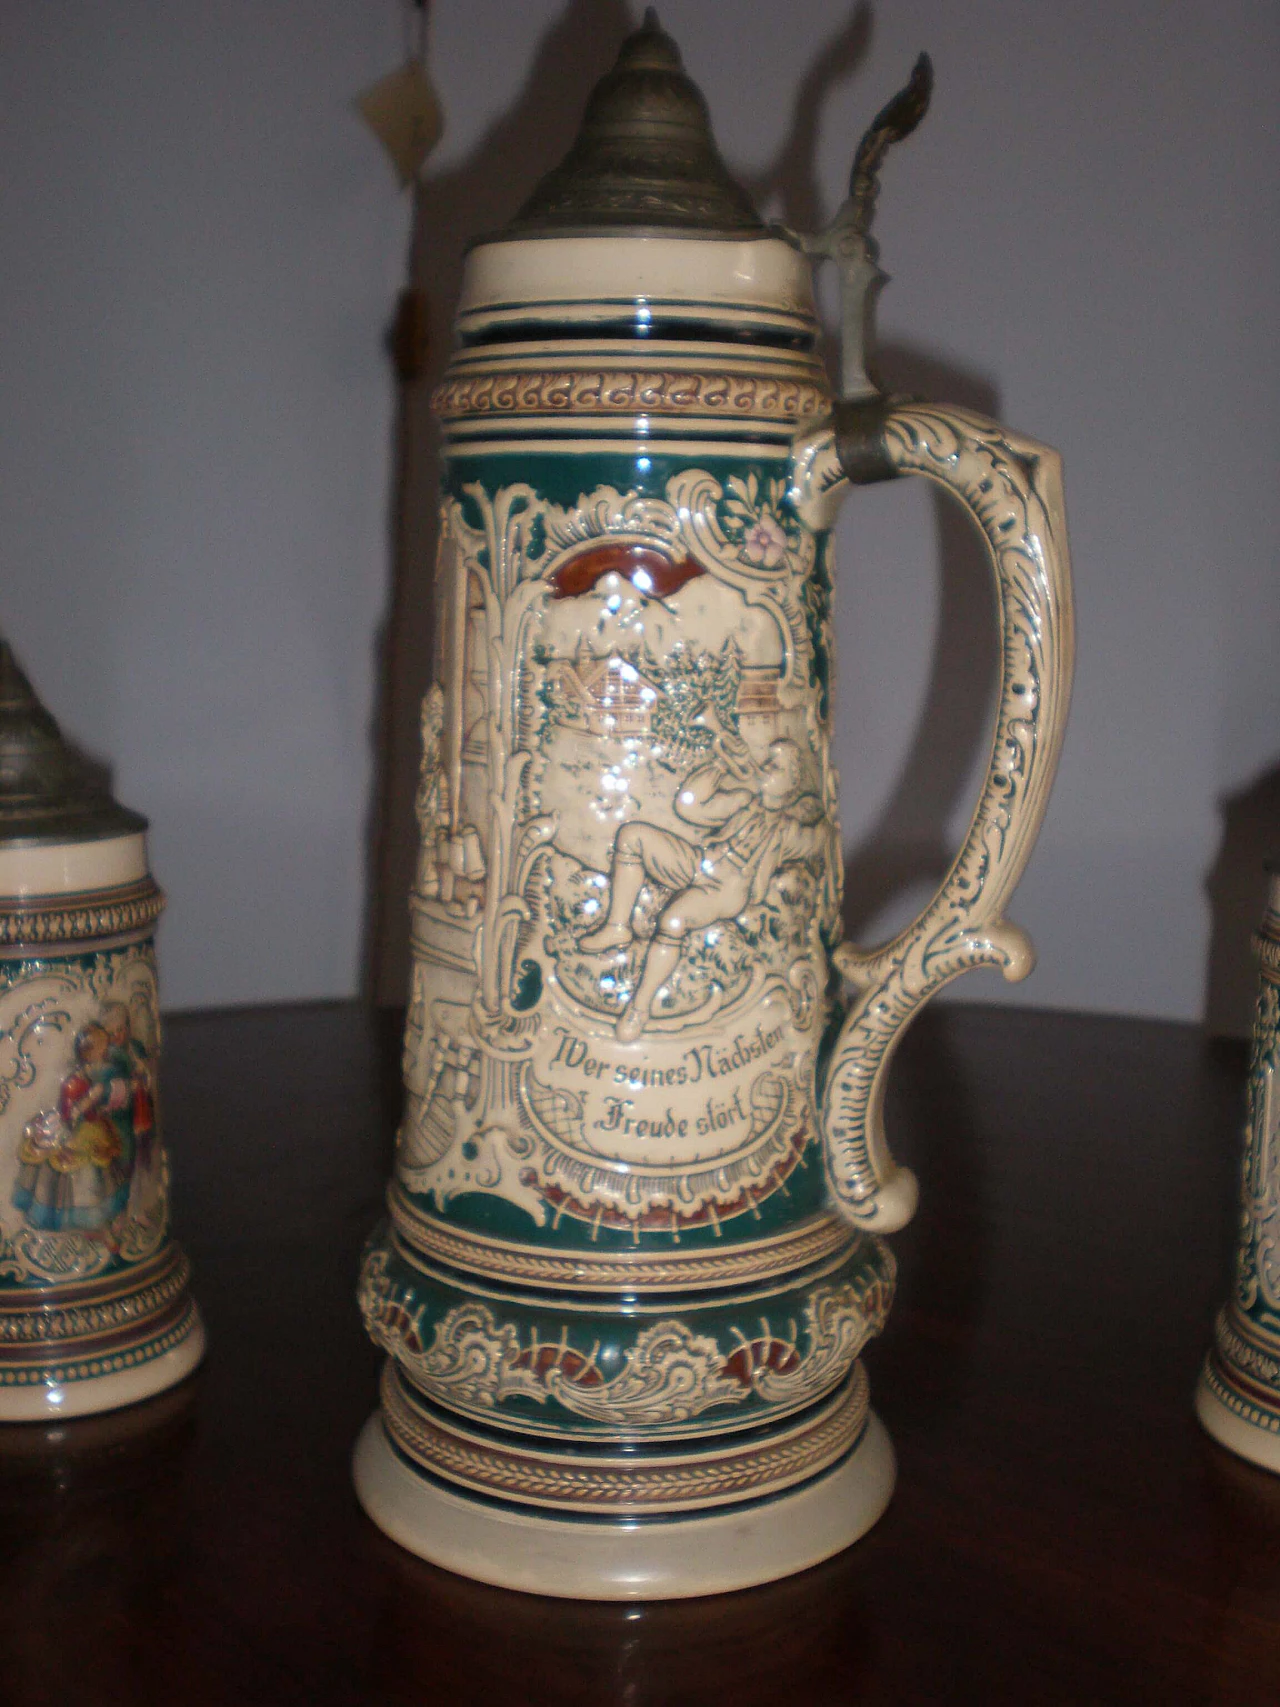 6 Ceramic beer mugs and pitcher, 19th century 5